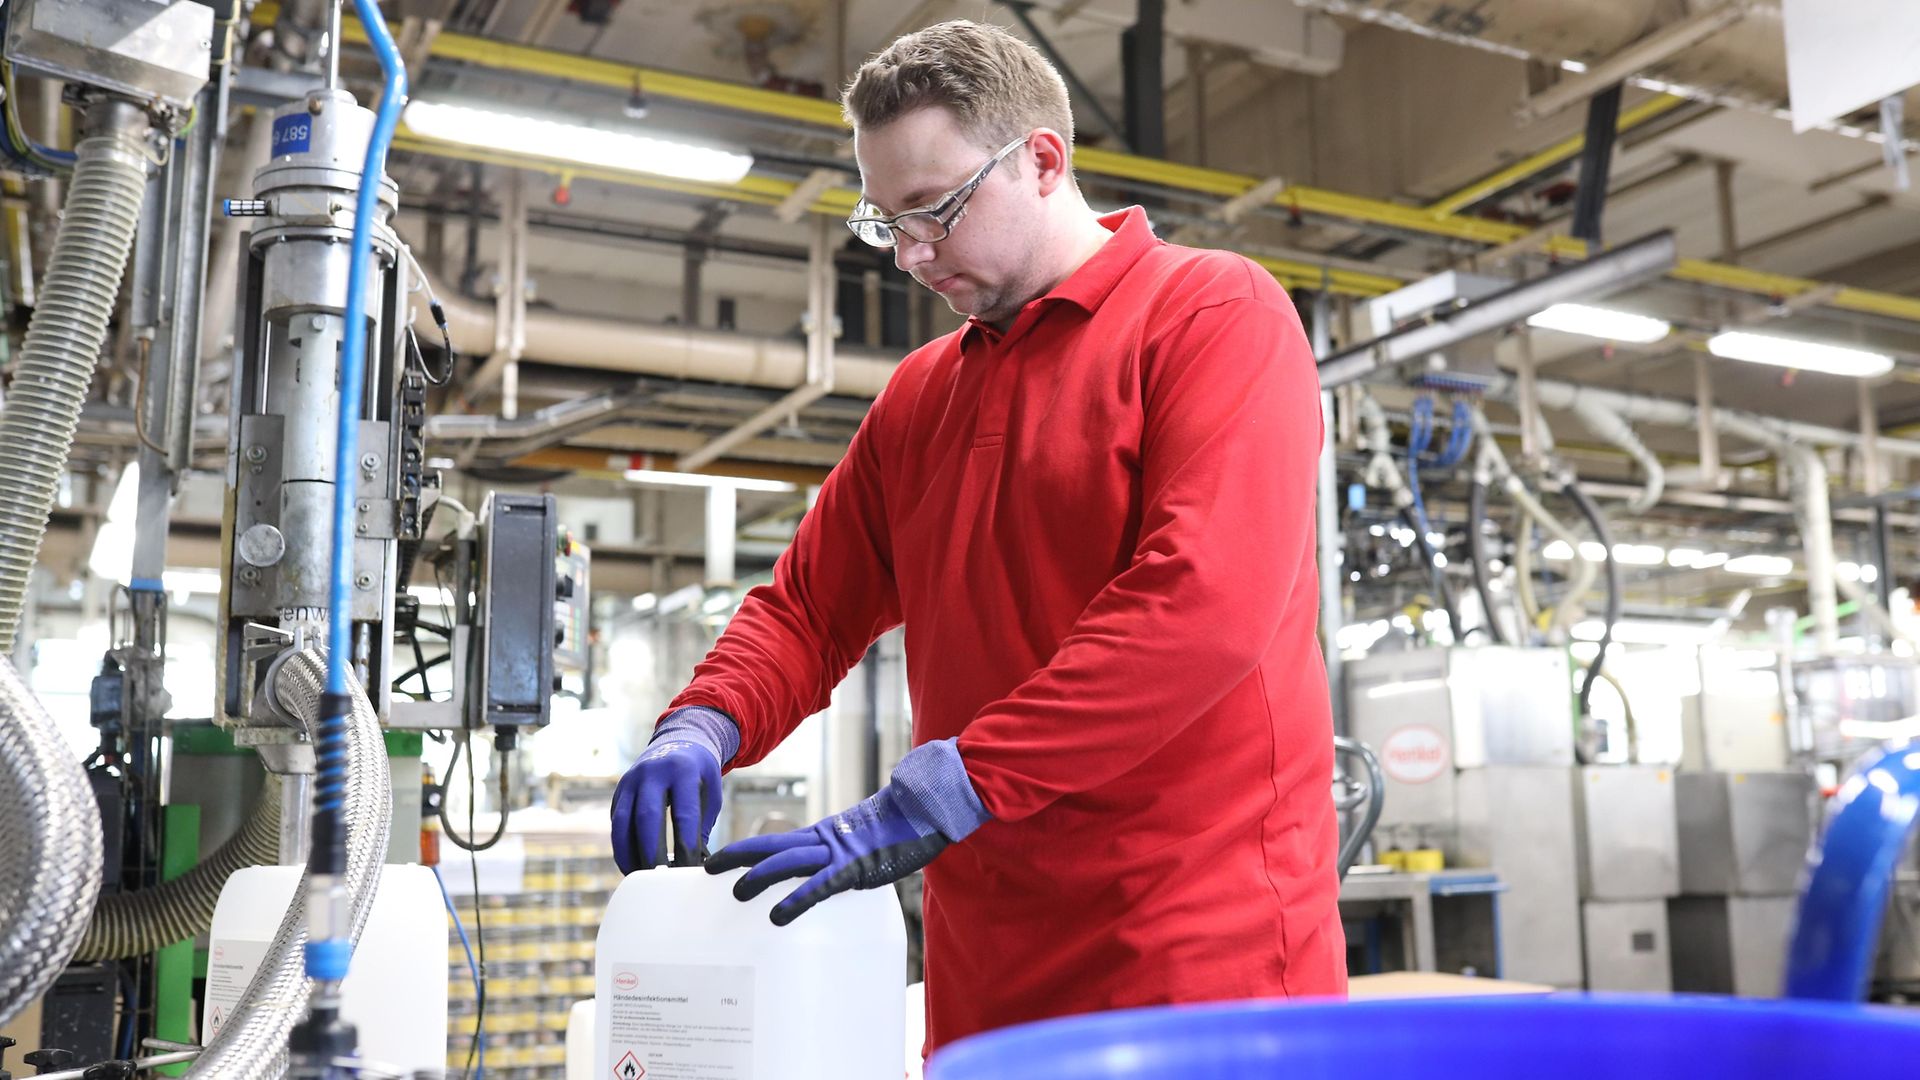 Henkel Employee filling up a canister with disinfectants